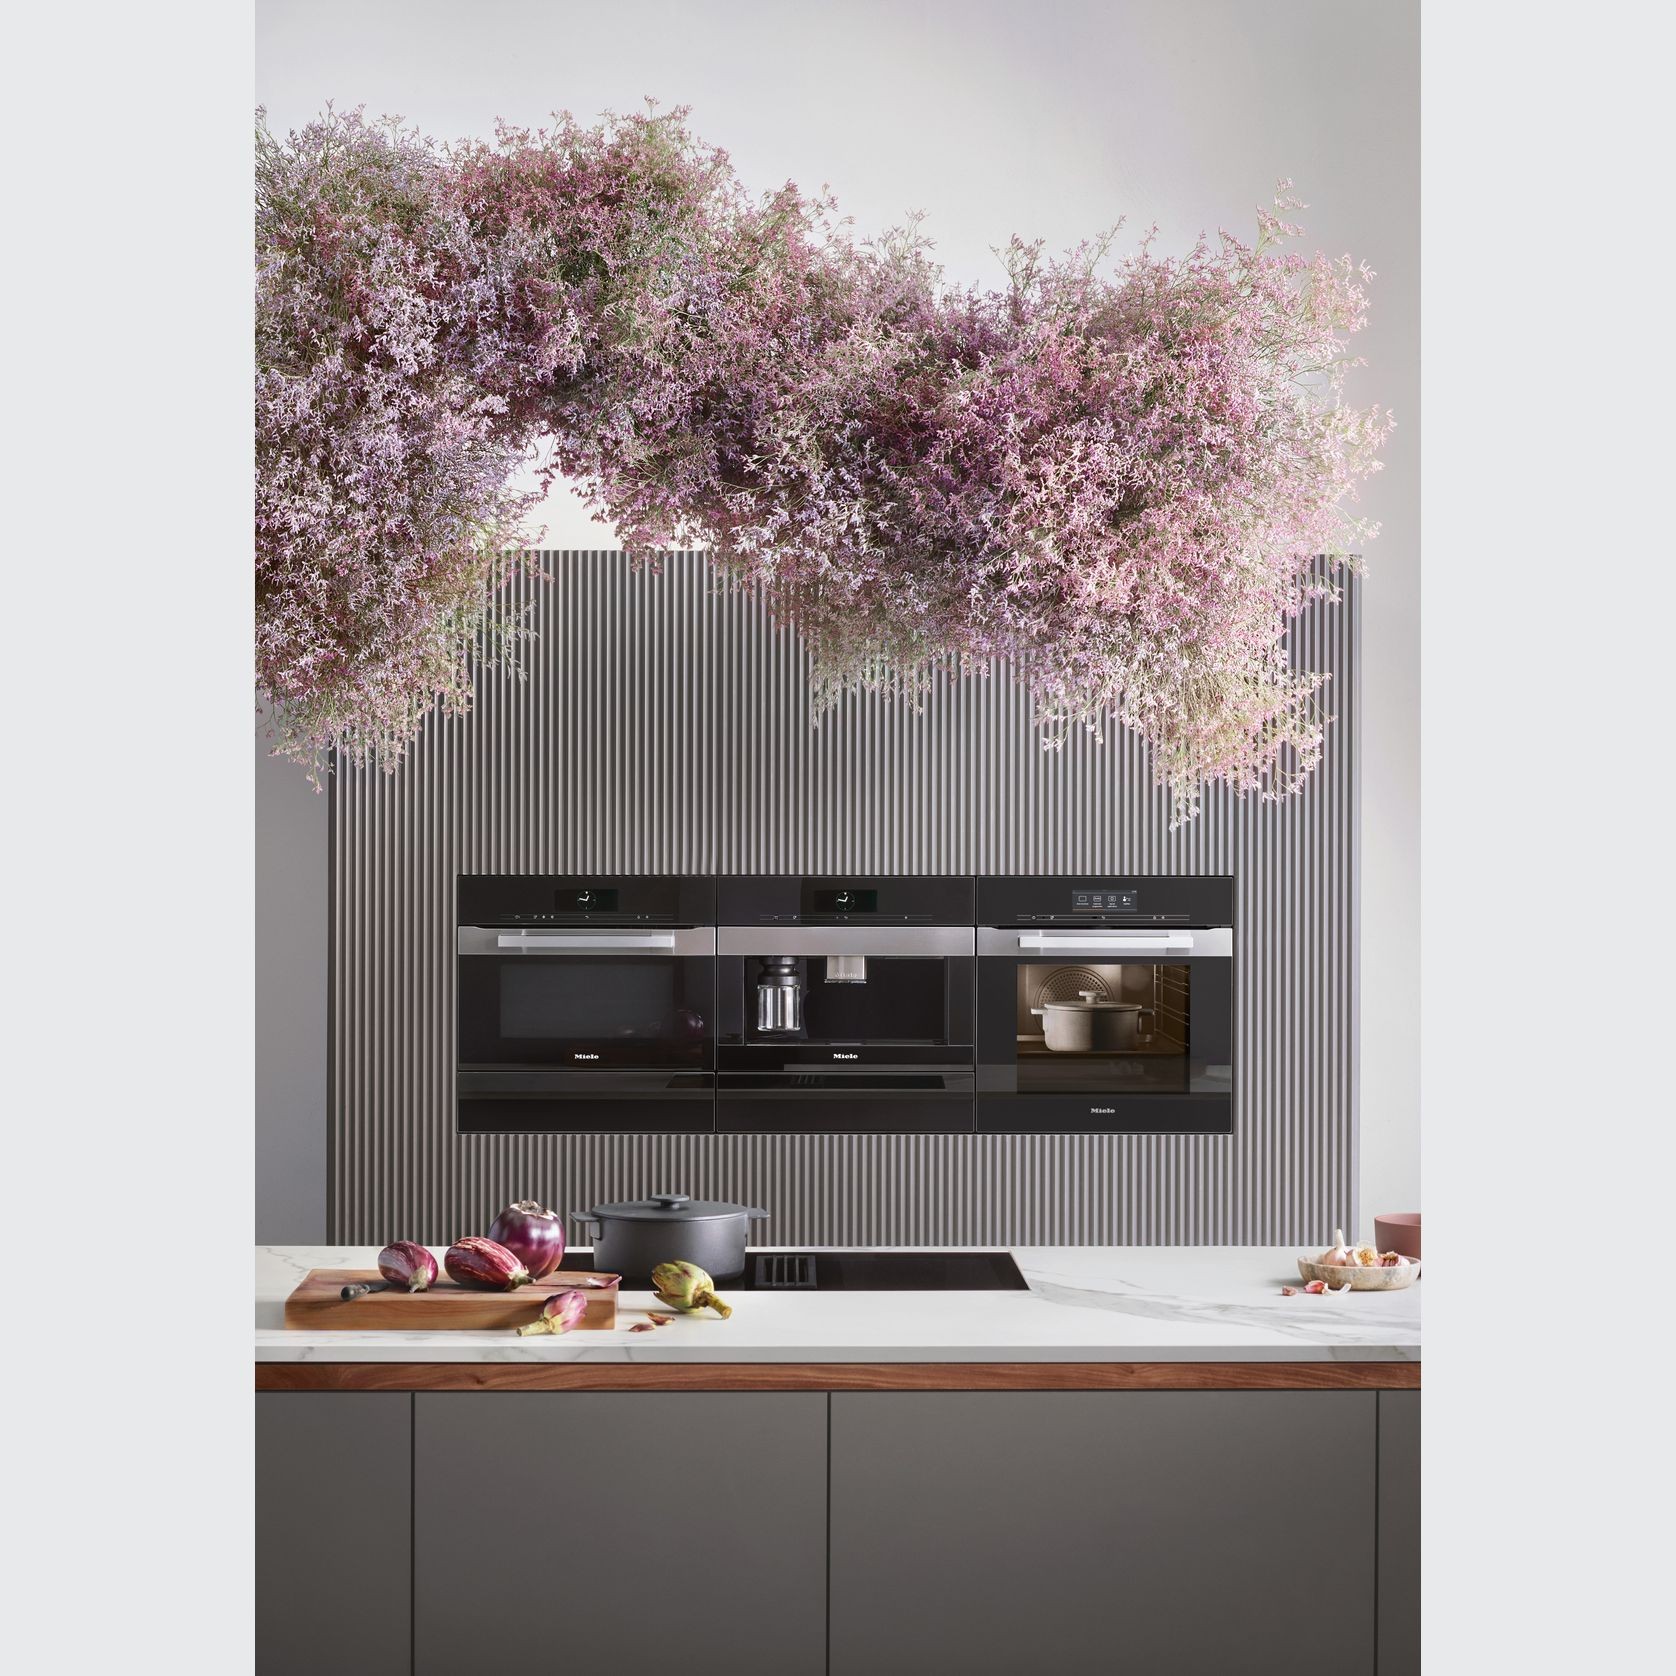 Miele Mtouch Obsidian Black Pyrolytic Oven W.600 gallery detail image